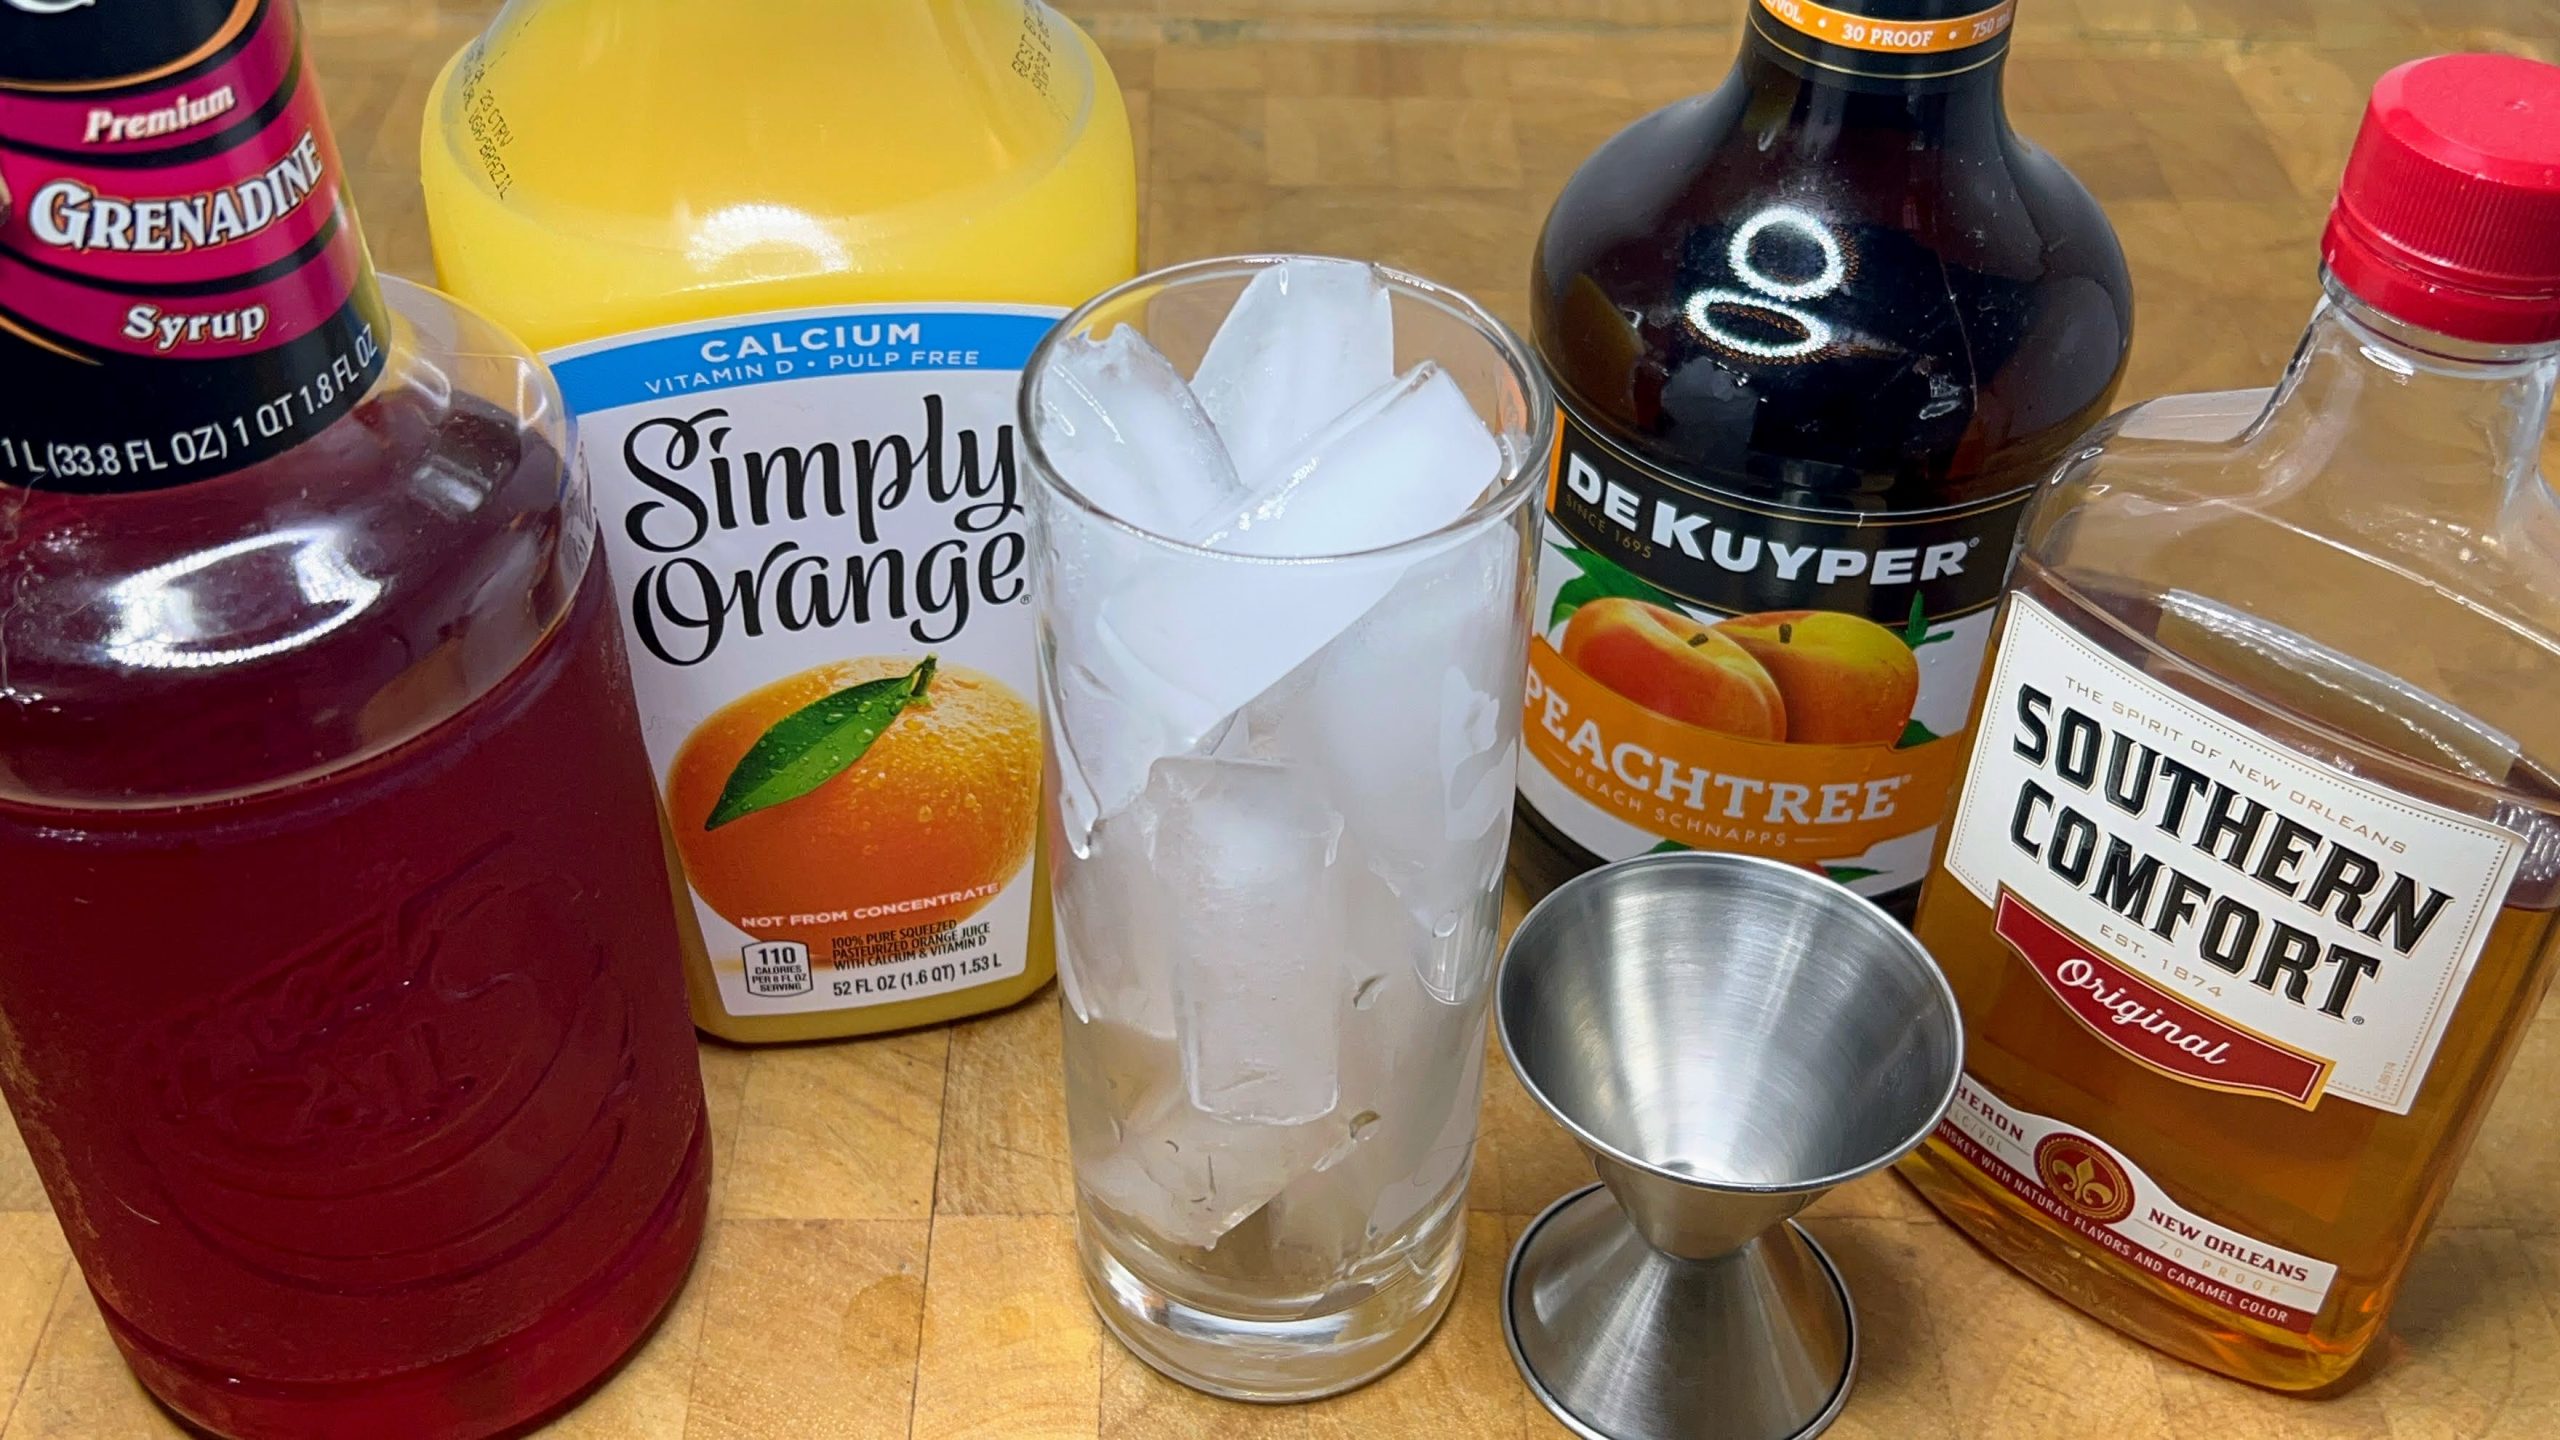 highball glass filled with ice next to jigger, and bottles of grenadine, OJ, peach schnapps and southern comfort